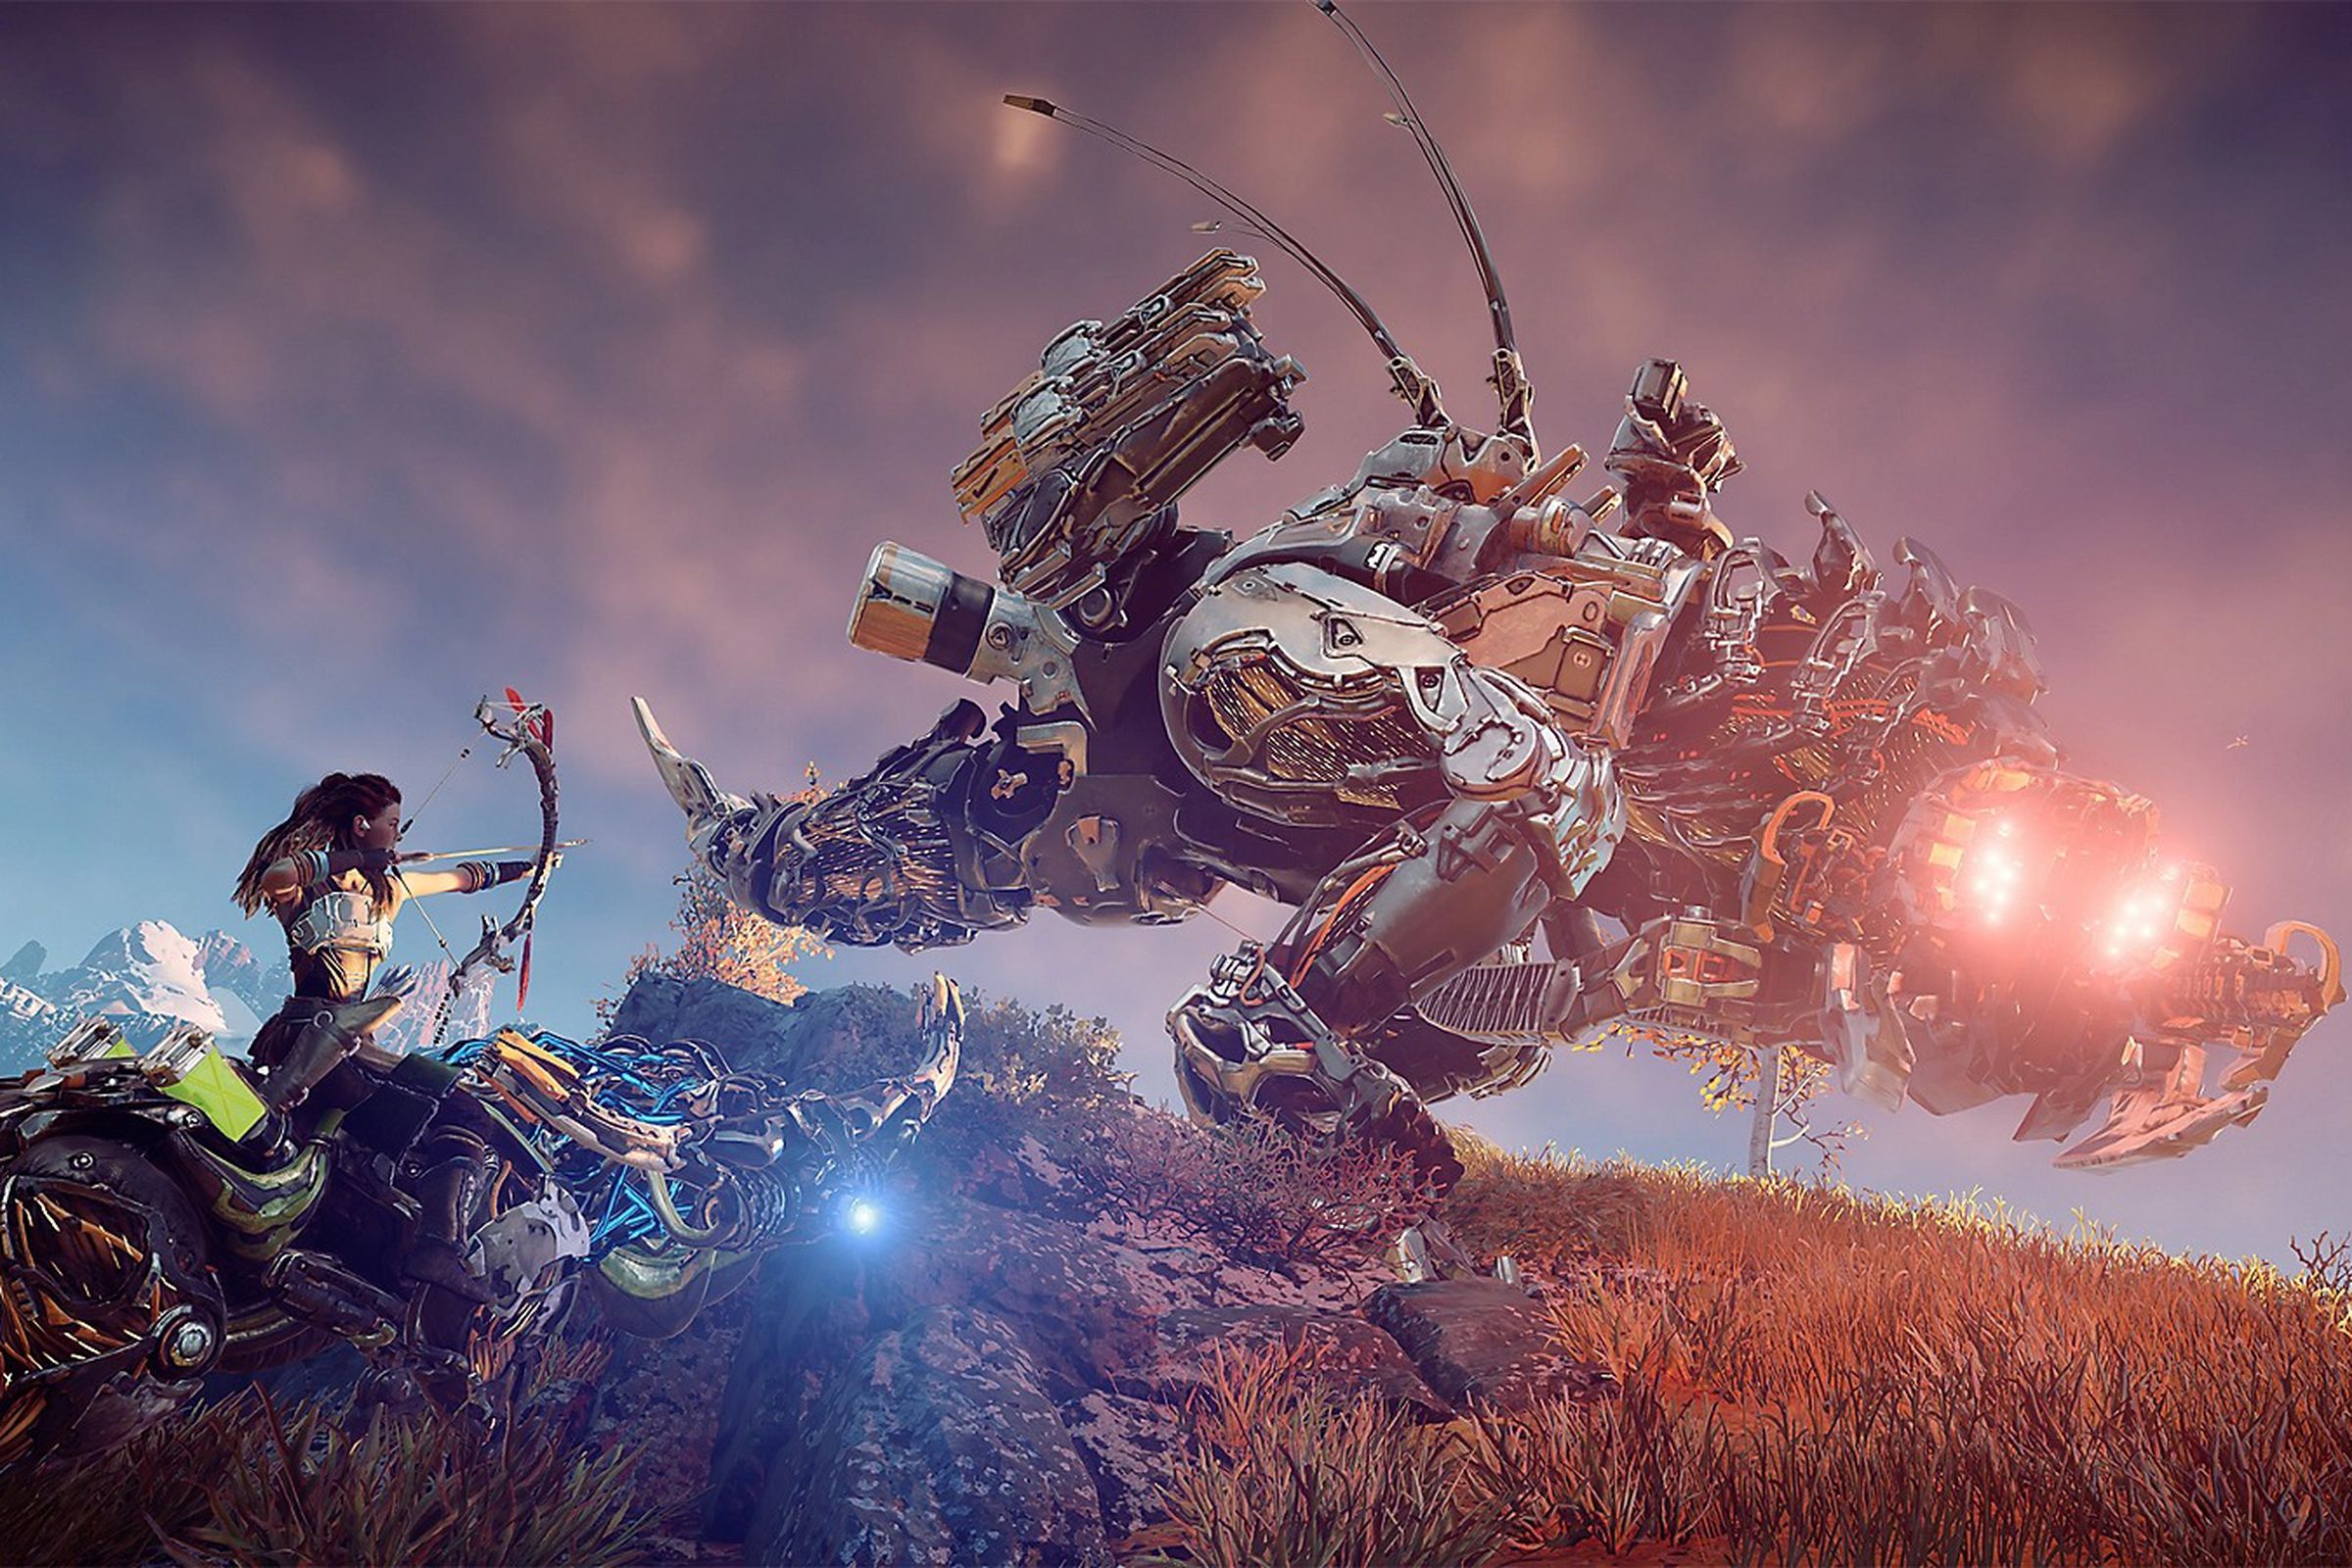 Aloy, while riding a machine, draws her bow toward a looming enemy nearby.